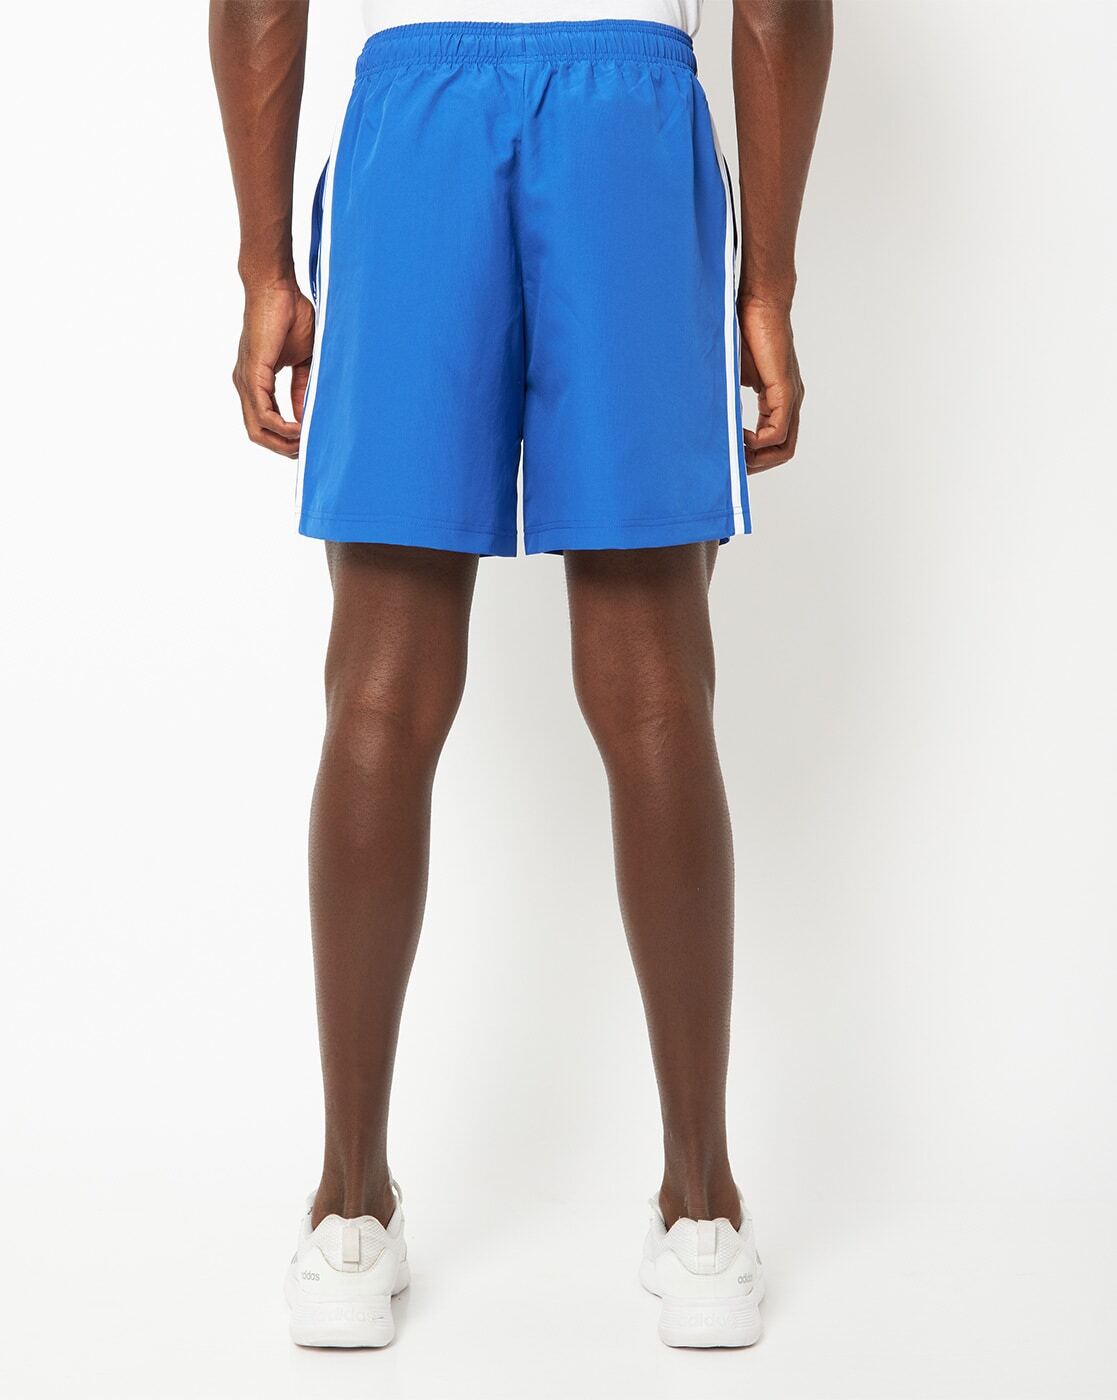 Shorts with Contrast Taping-Hb0803